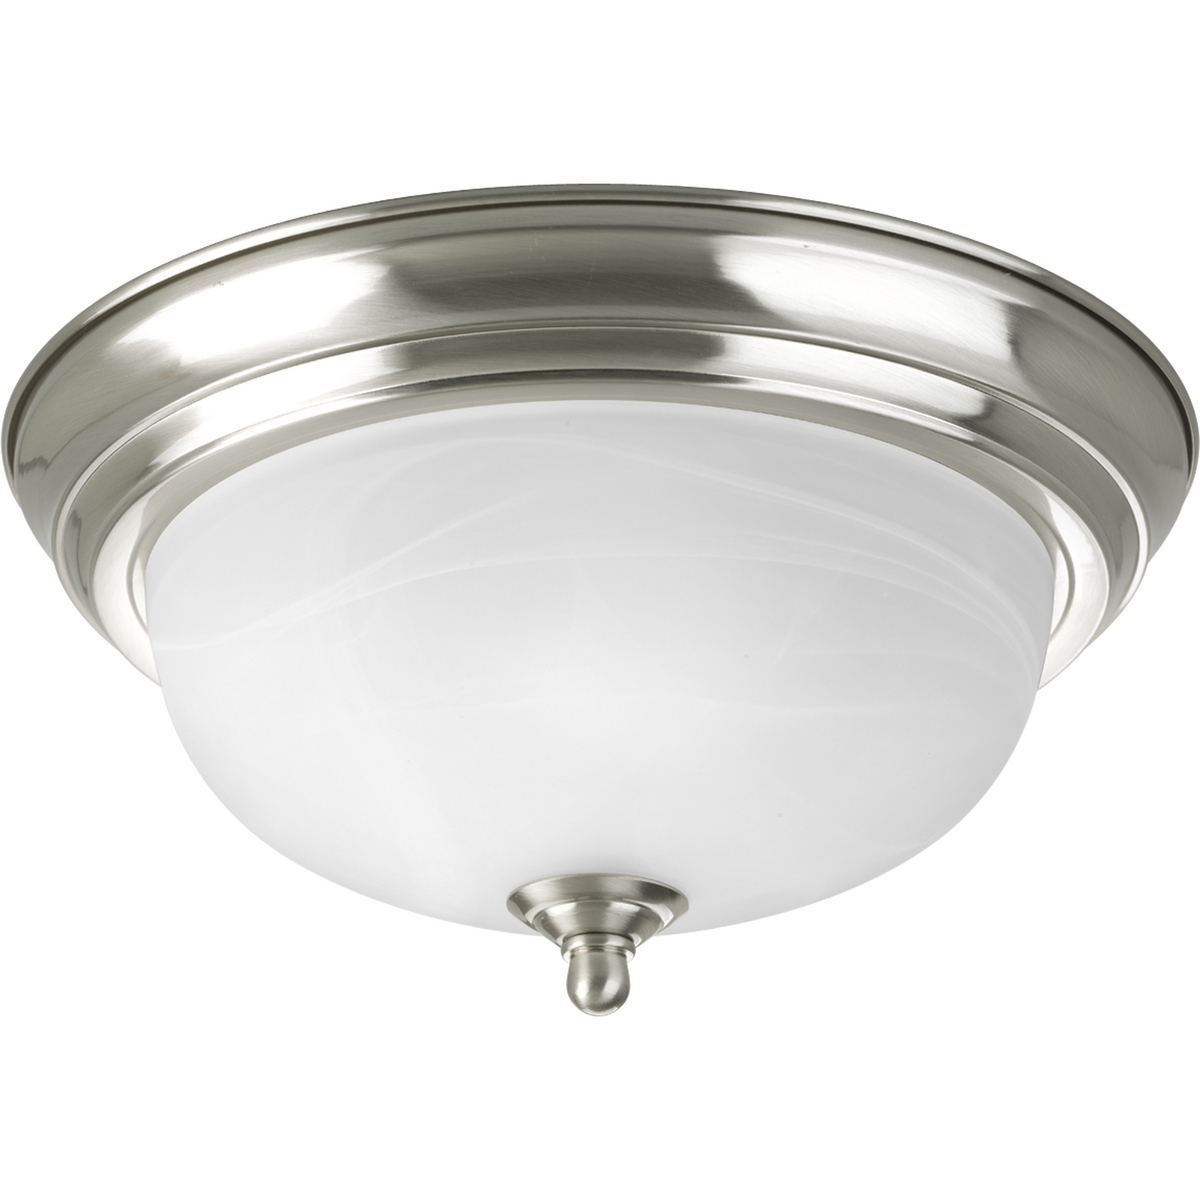 One-light 11 in flush mount with dome shaped alabaster glass, solid trim and decorative knobs. Center lock-up with matching finial. Brushed Nickel finish.